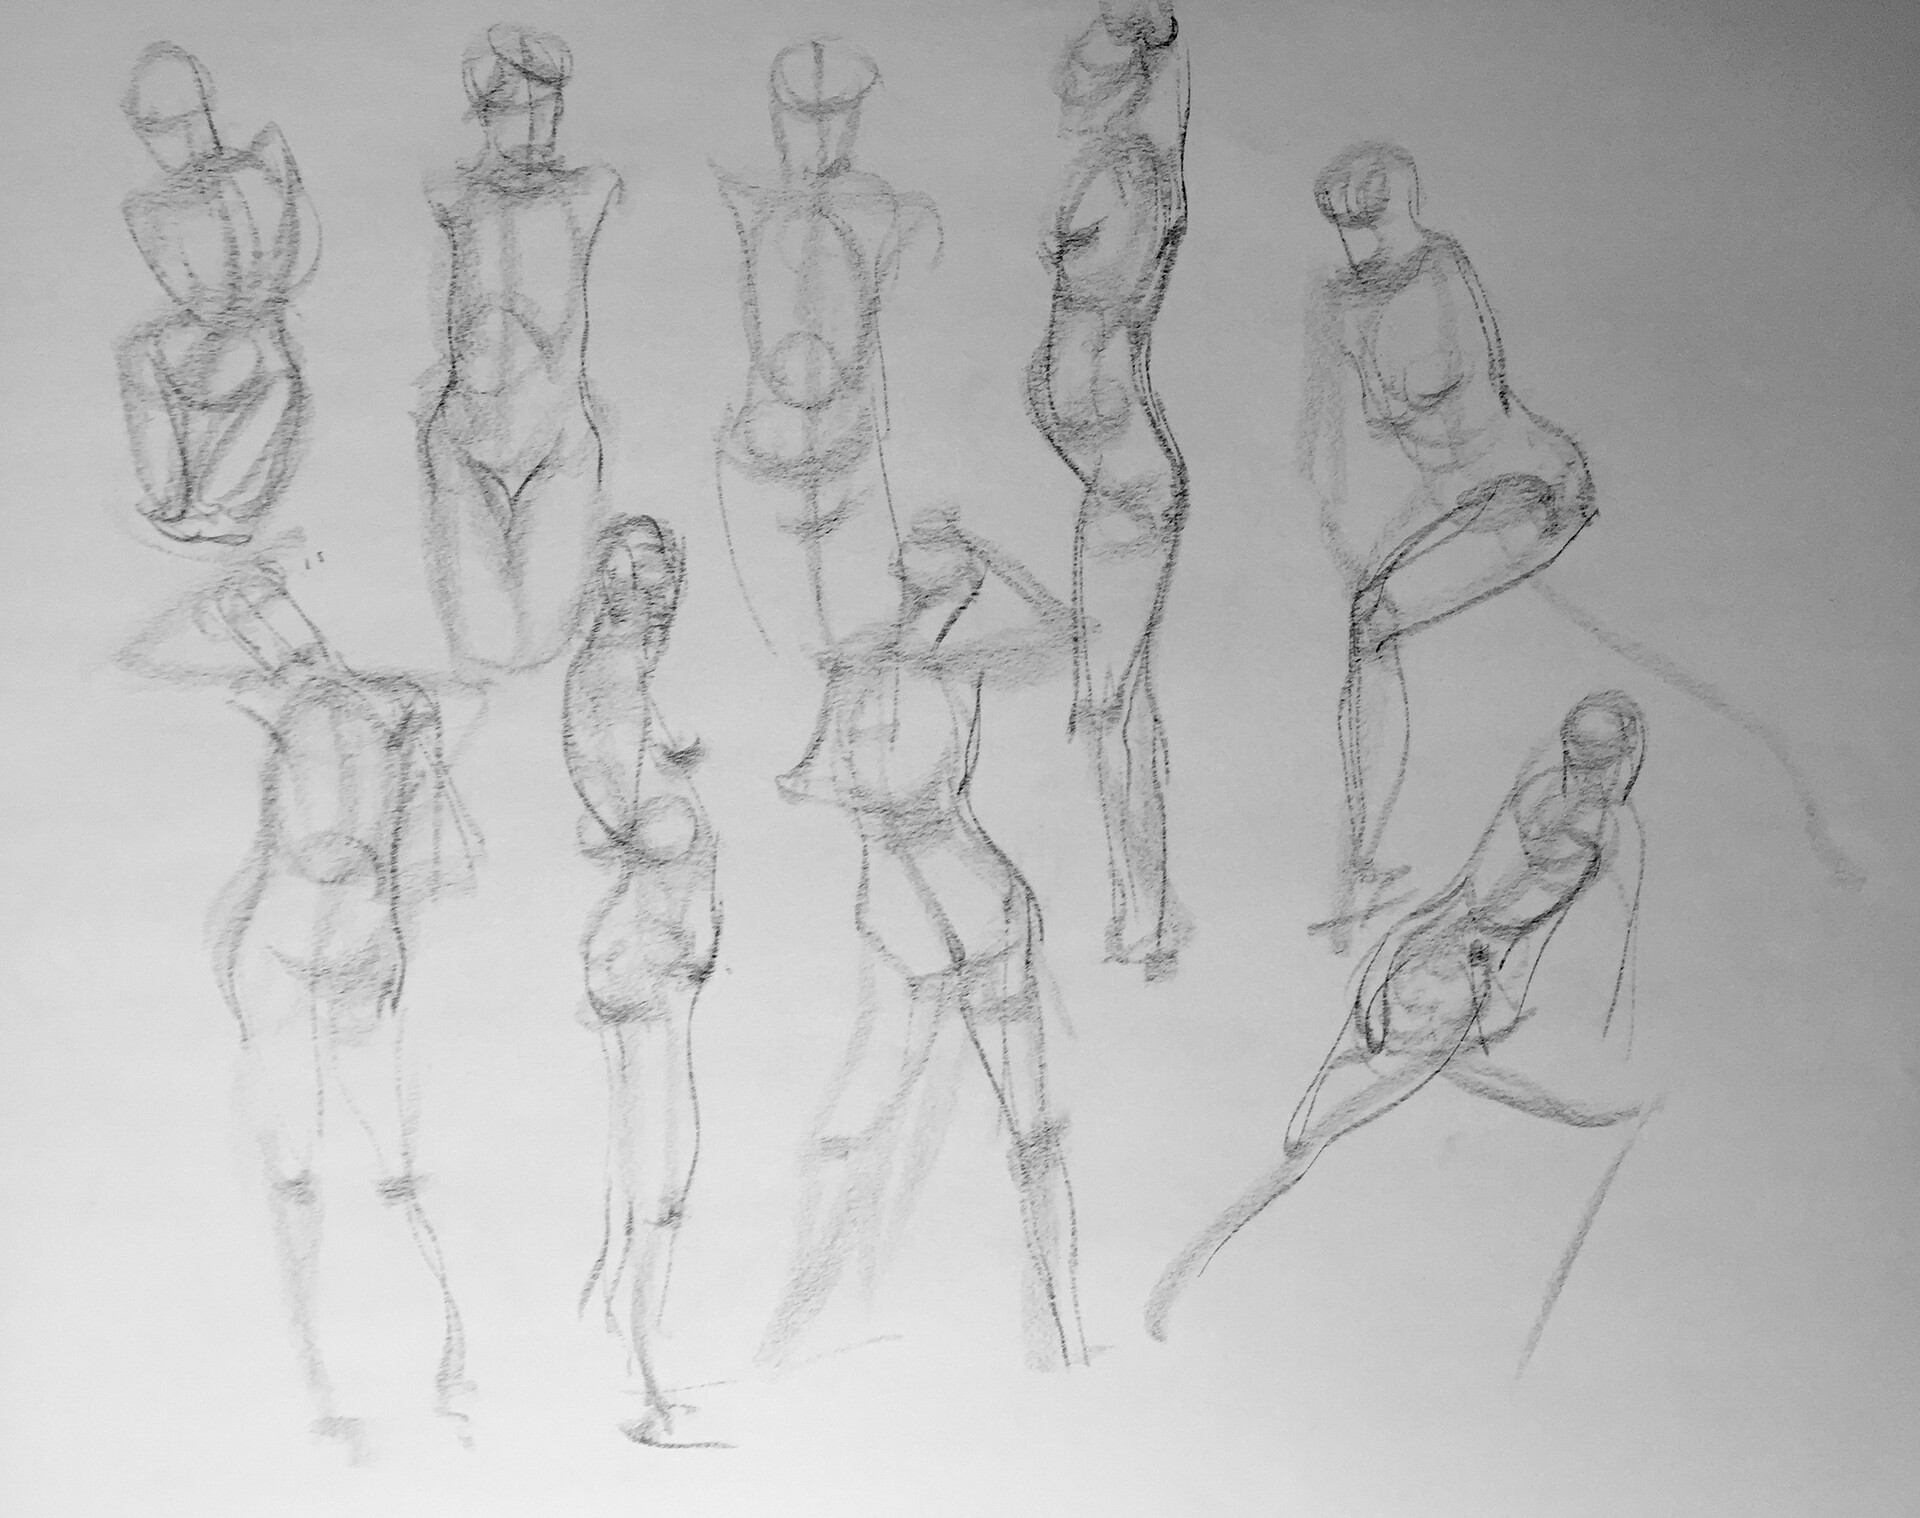 Male figure Quick pose lay in examples by FUNKYMONKEY1945 on DeviantArt